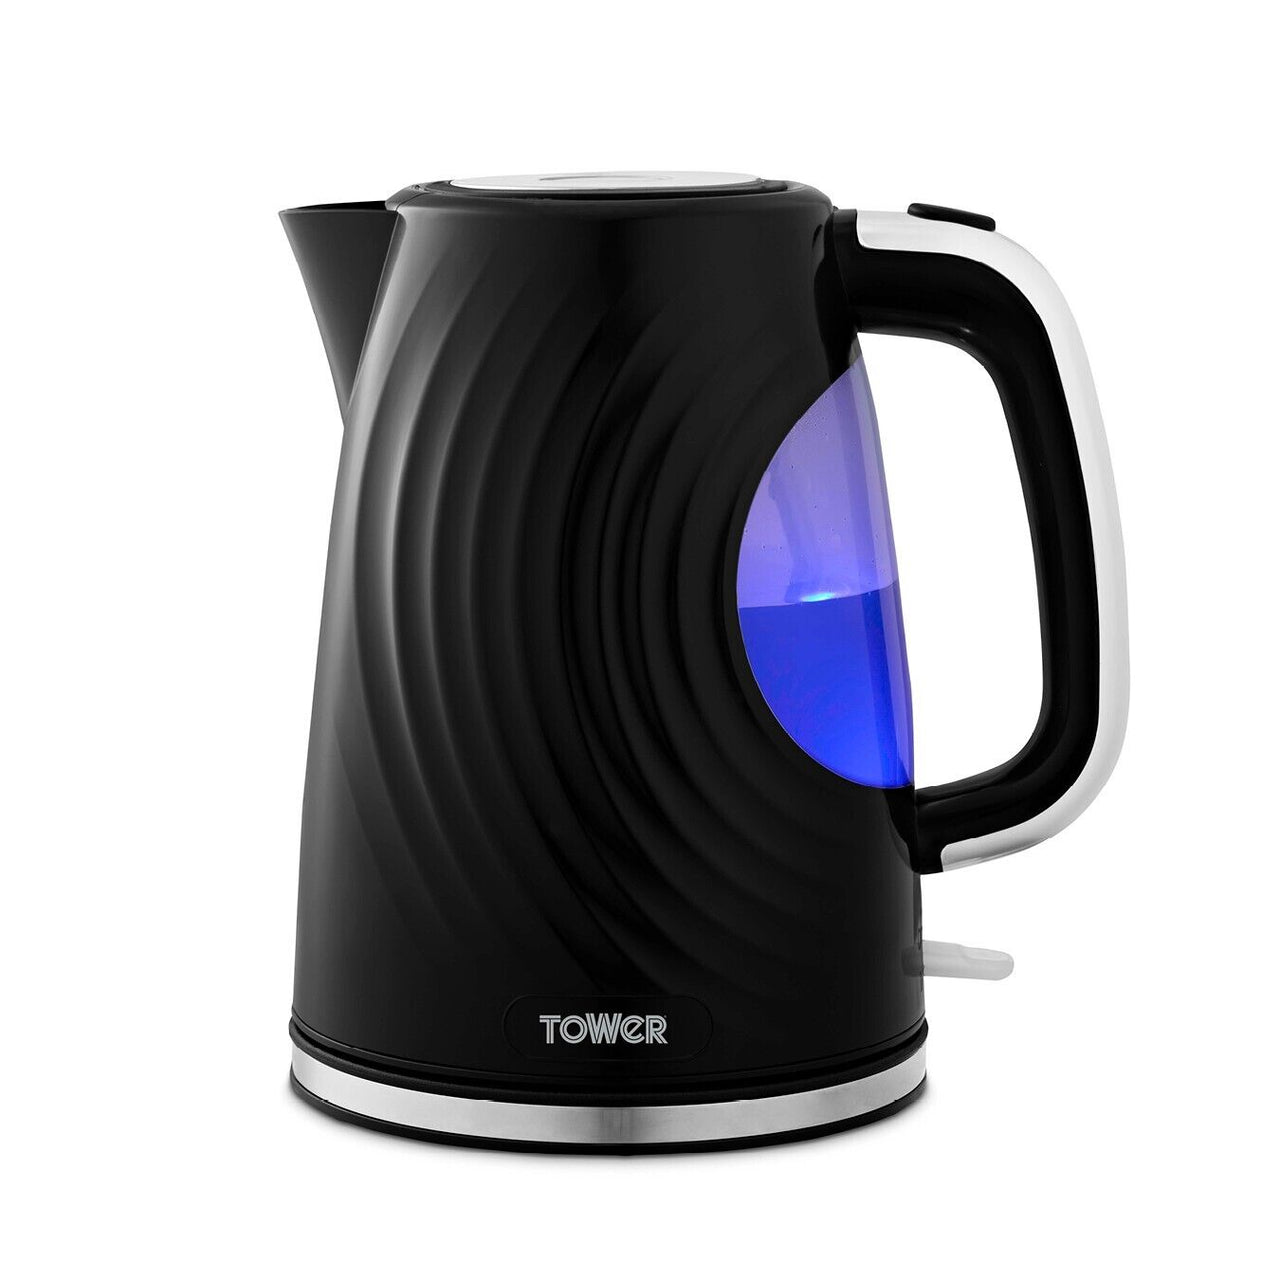 Tower Sonar 1.7L 3KW Kettle Black with Chrome Accents and Stylish Ripple Design